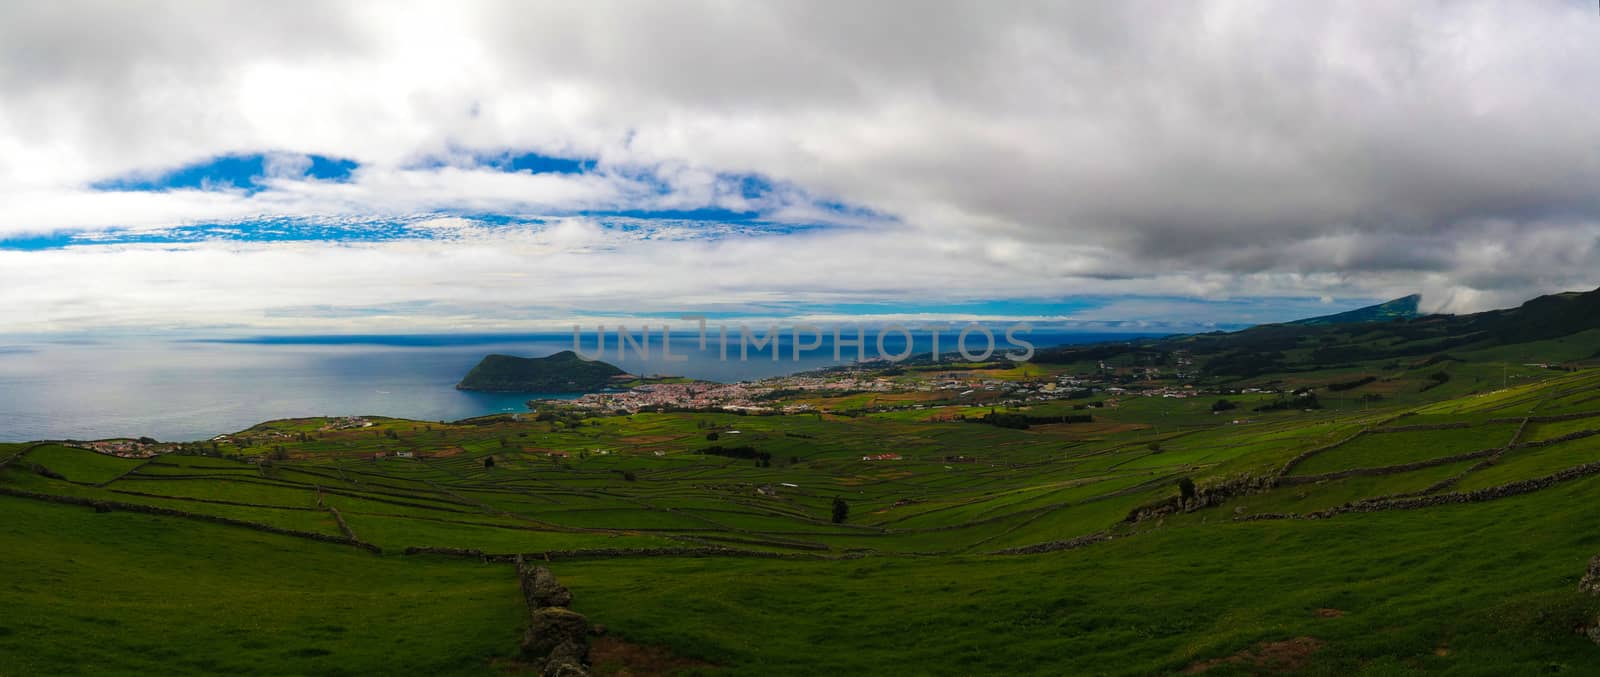 Landscape with Monte Brasil volcano and Angra do Heroismo in Terceira island, Azores, Portugal